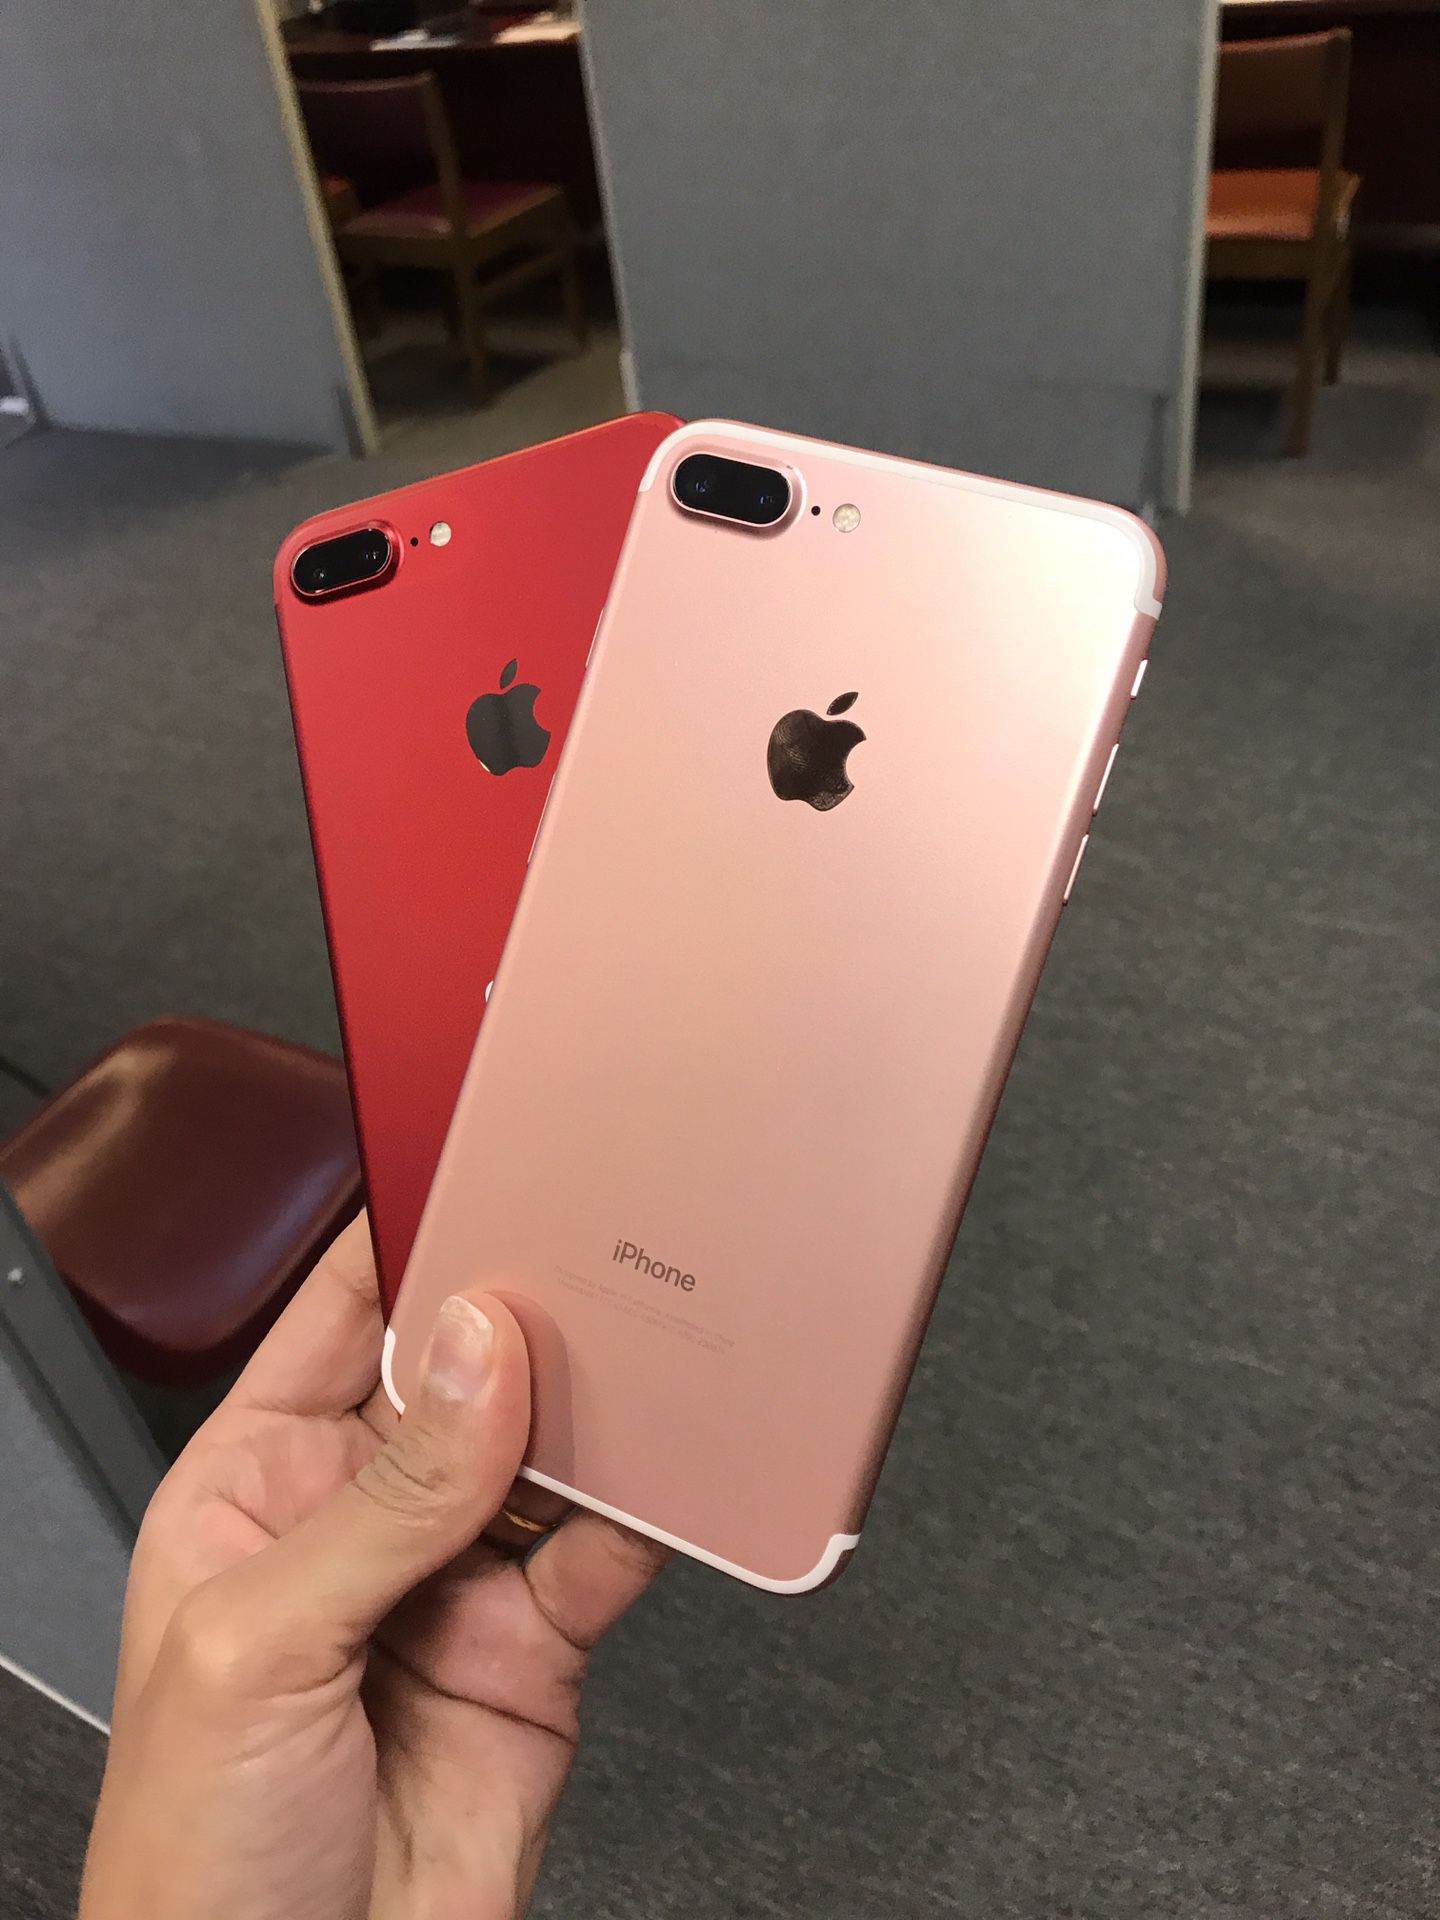 iPhone 7 Plus 128GB Unlocked Excellent Condition $289 each